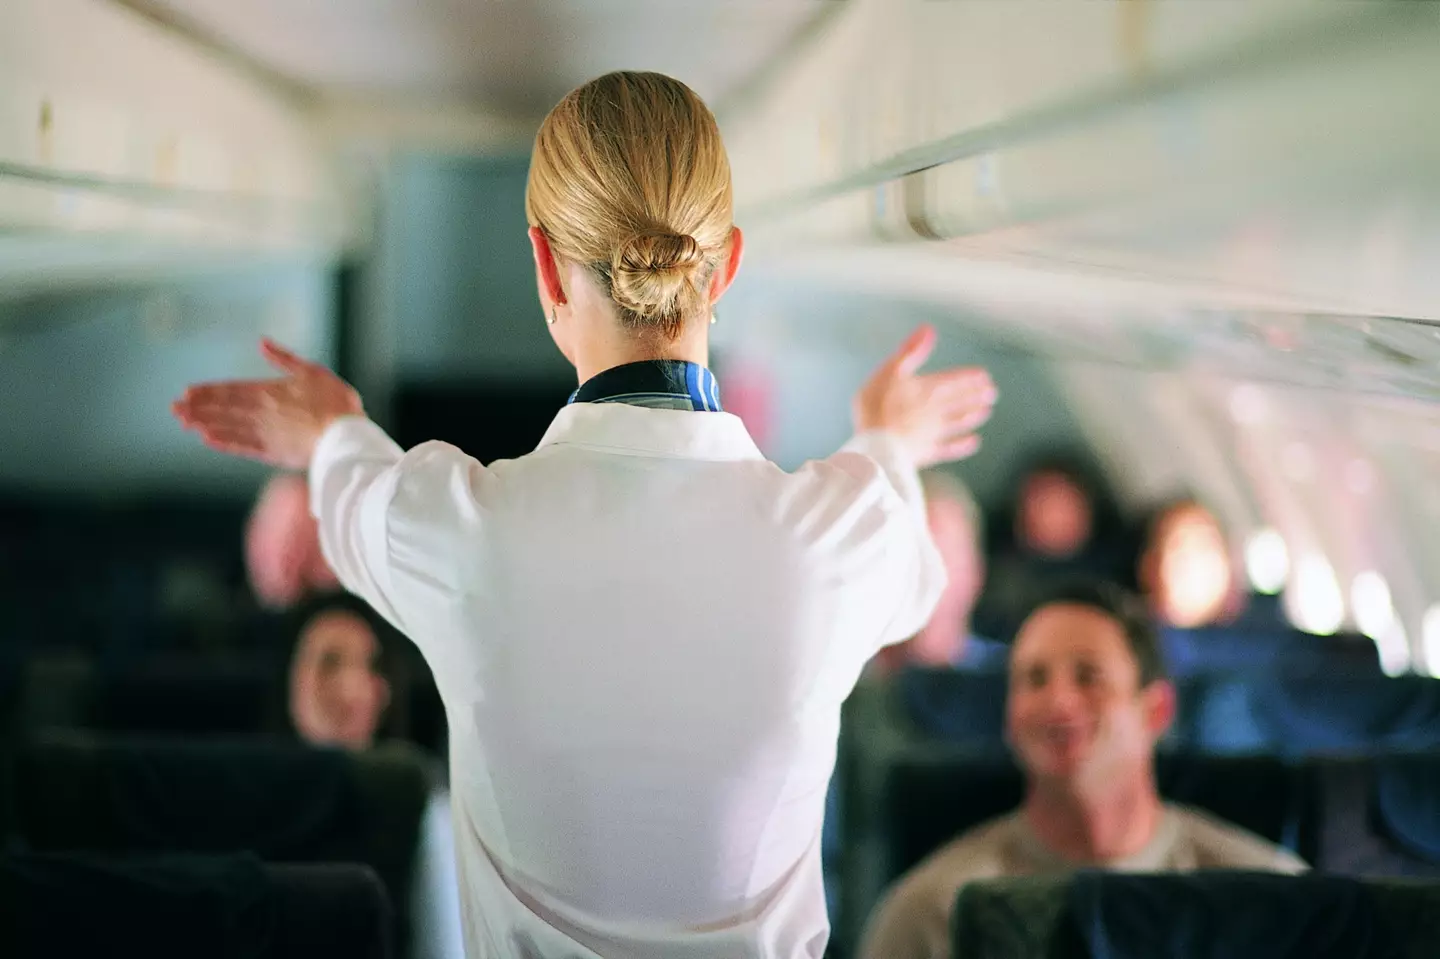 Cabin crew use code words to interact with each other.